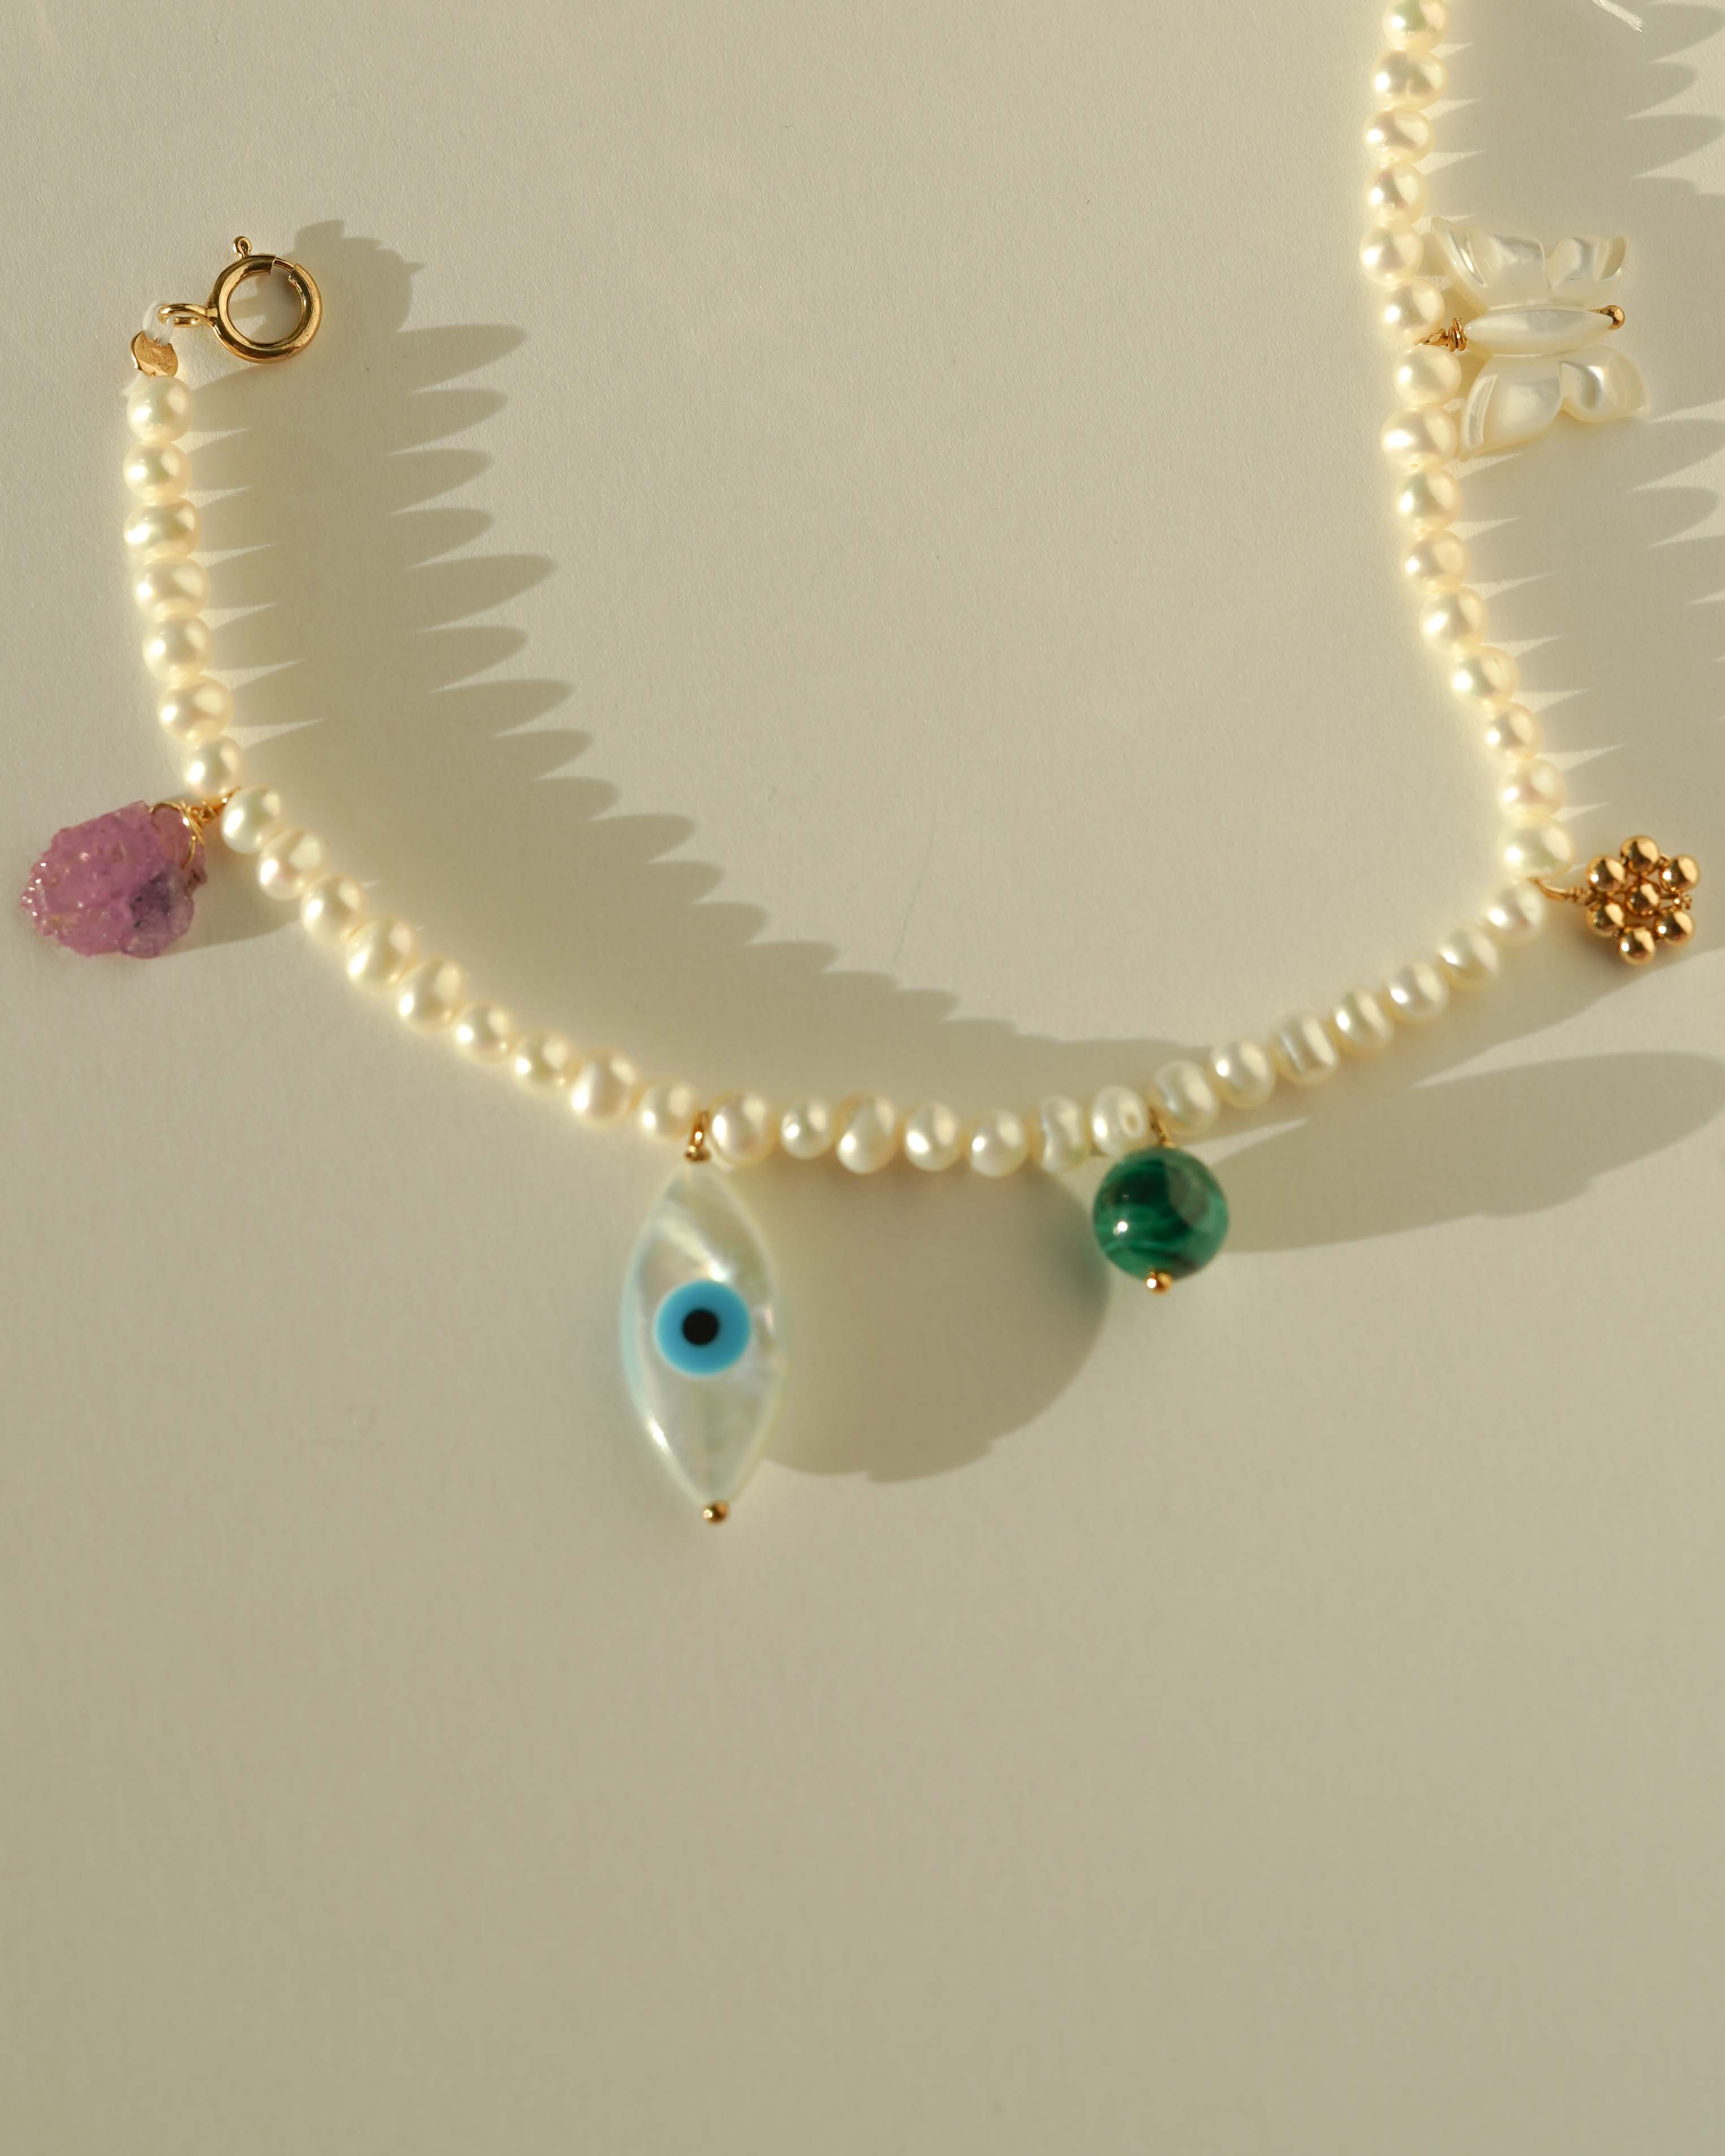 Rylan Bracelet by KOZAKH. A 6 to 7 inch adjustable length, 3mm freshwater pearl strand bracelet, crafted in 14K Gold Filled, featuring a Pink Tourmaline slice, a Mother of Pearl butterfly charm, a round Malachite gemstone, and Mother of Pearl evil eye charm. 